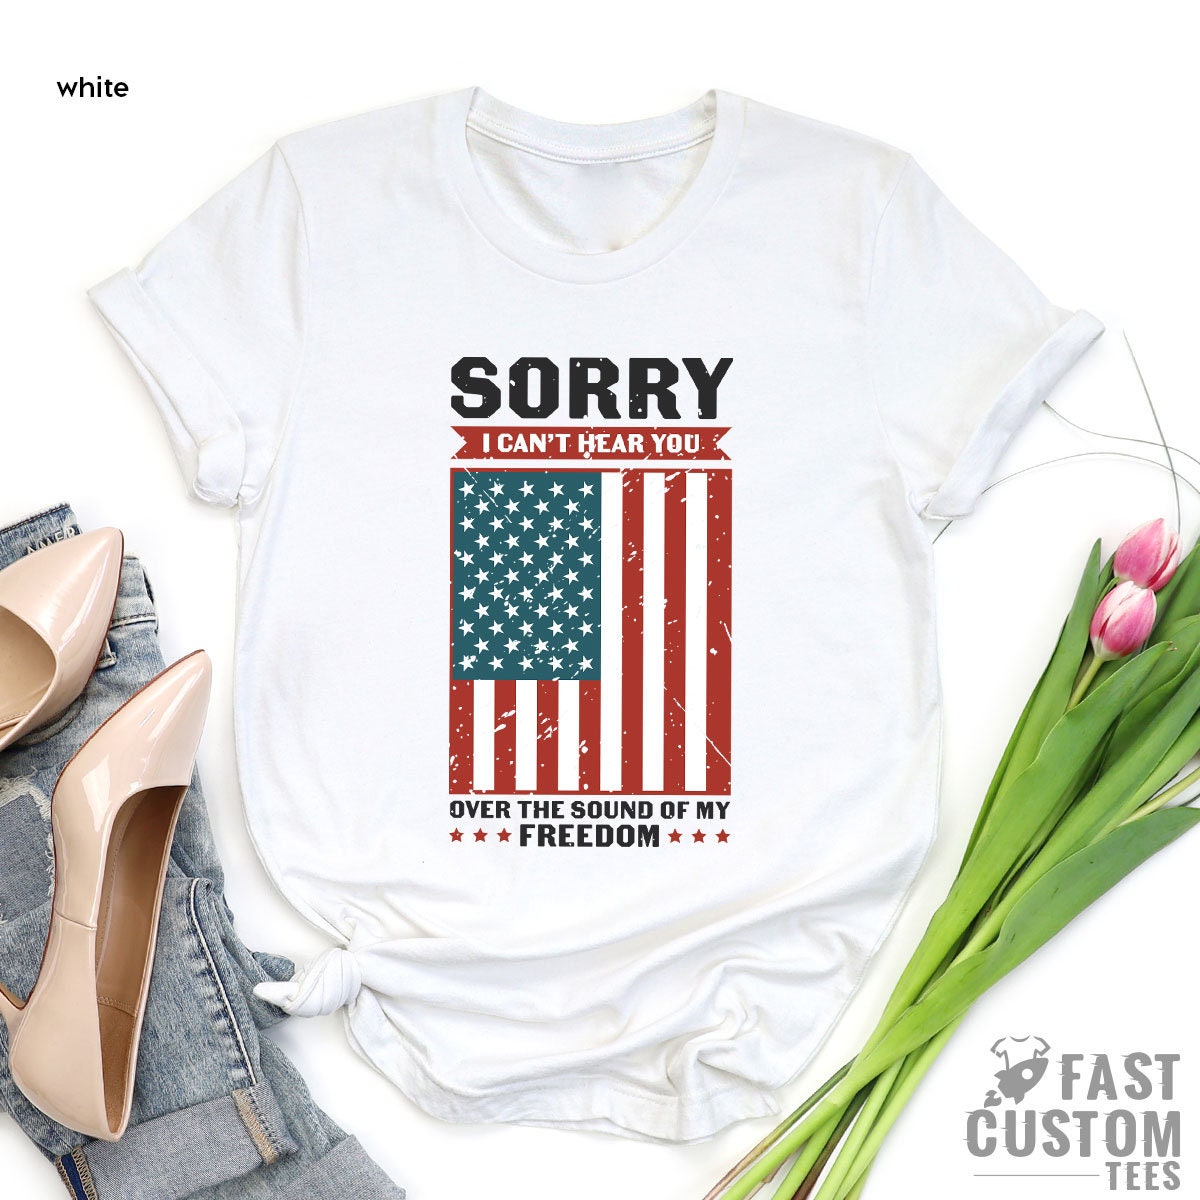 Patriotic Shirt, Sorry I Can't Hear You Over The Sound Of My Freedom, Independence T-Shirt, American Flag Shirt, USA Shirt, Patriot Shirt - Fastdeliverytees.com